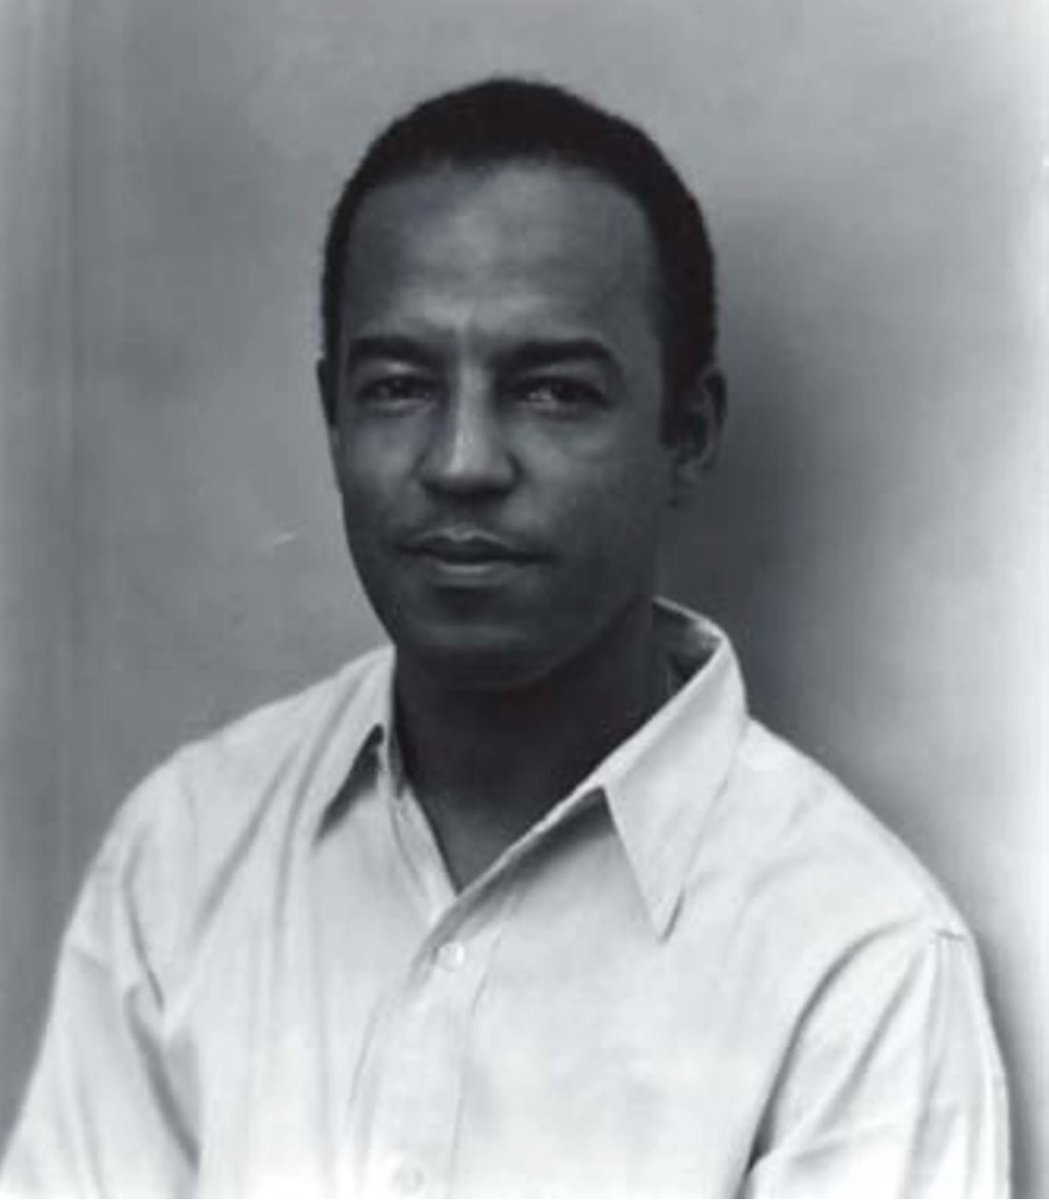 Richmond Barthé (b. 1901) was among the greatest American sculptors of the 20th century. He exhibited alongside Matisse & Picasso, exchanged ideas with Langston Hughes & Alain Locke, & commemorated numerous figures including Toussaint L’Ouverture, Josephine Baker, & many others.